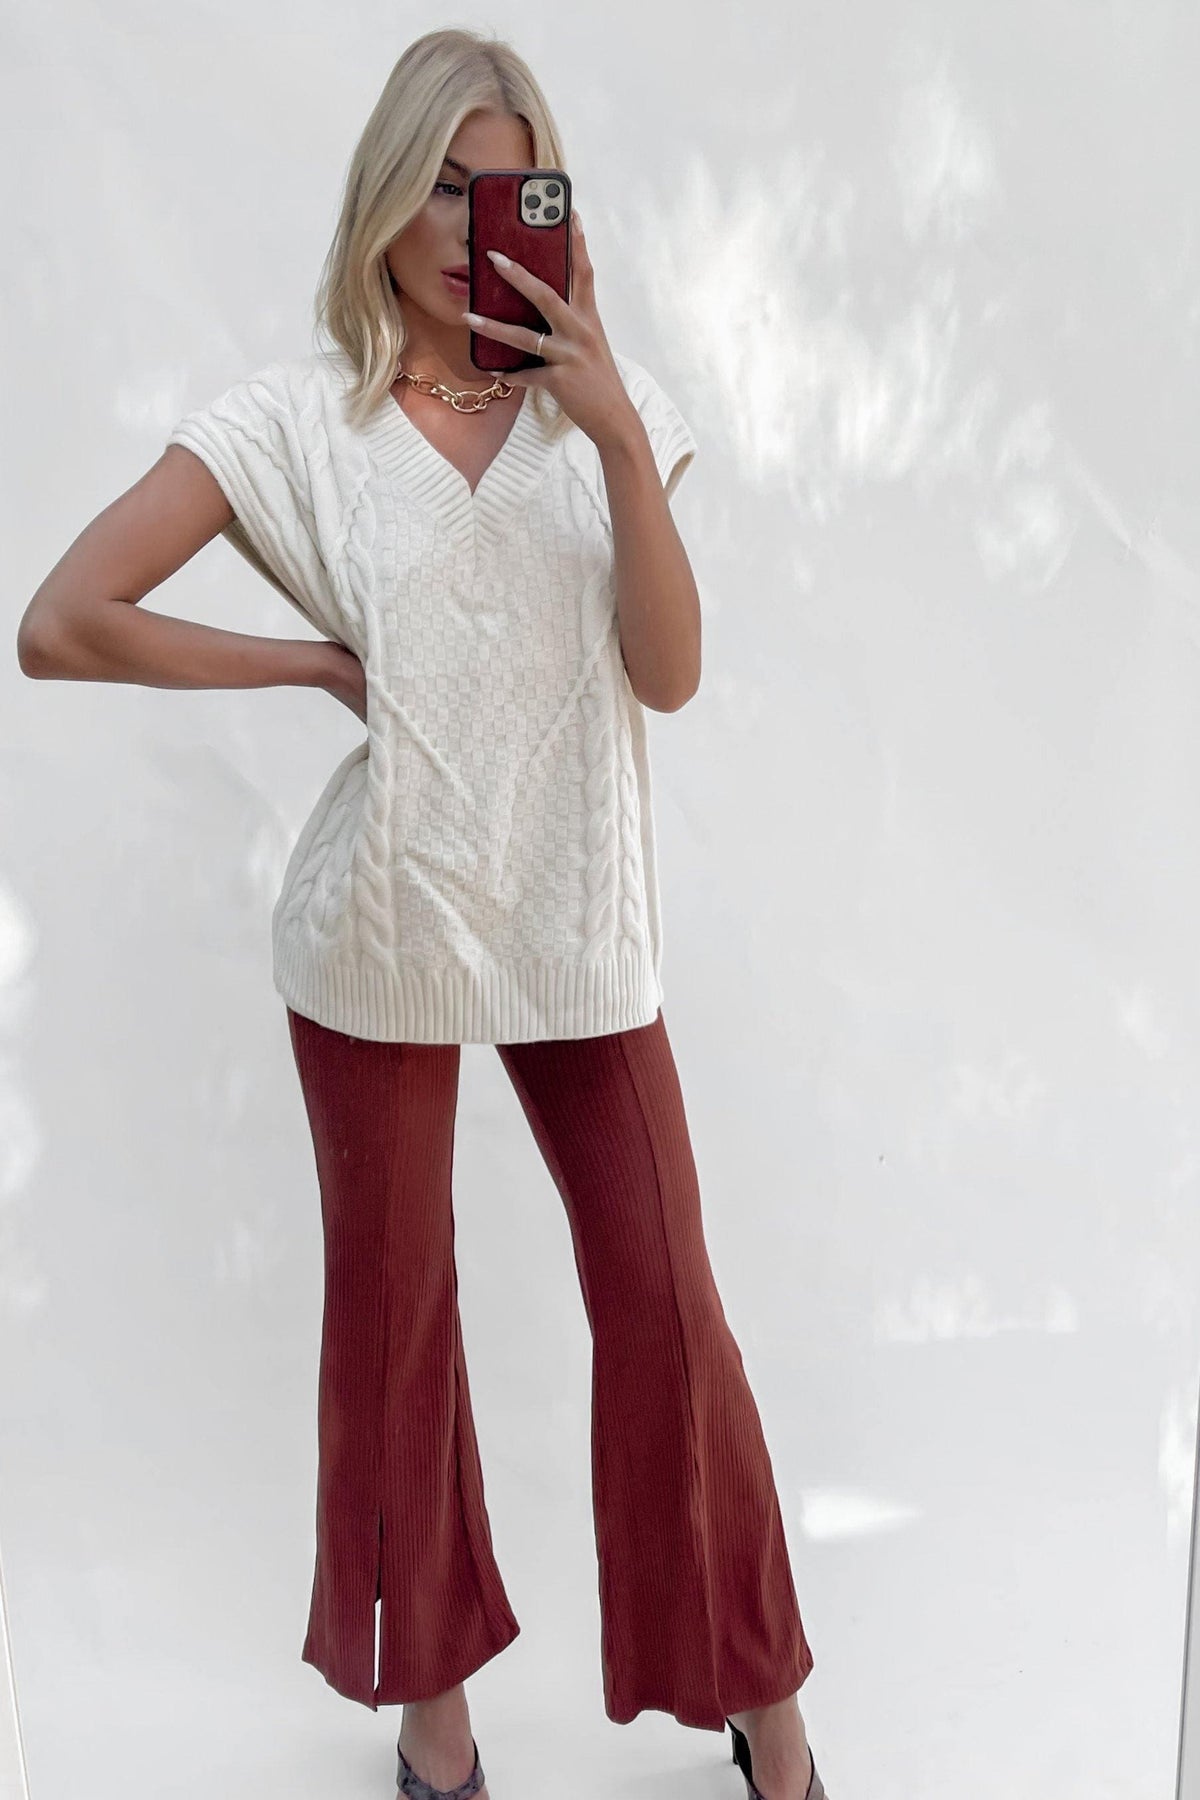 Rusty Pants, BOTTOMS, BROWN, PANTS, RED, Sale, Shop The Latest Rusty Pants Only 60.00 from MISHKAH FASHION:, Our New Rusty Pants is only $61.00-We Have The Latest Pants | Shorts | Skirts @ Mishkah Online Fashion Boutique-MISHKAH